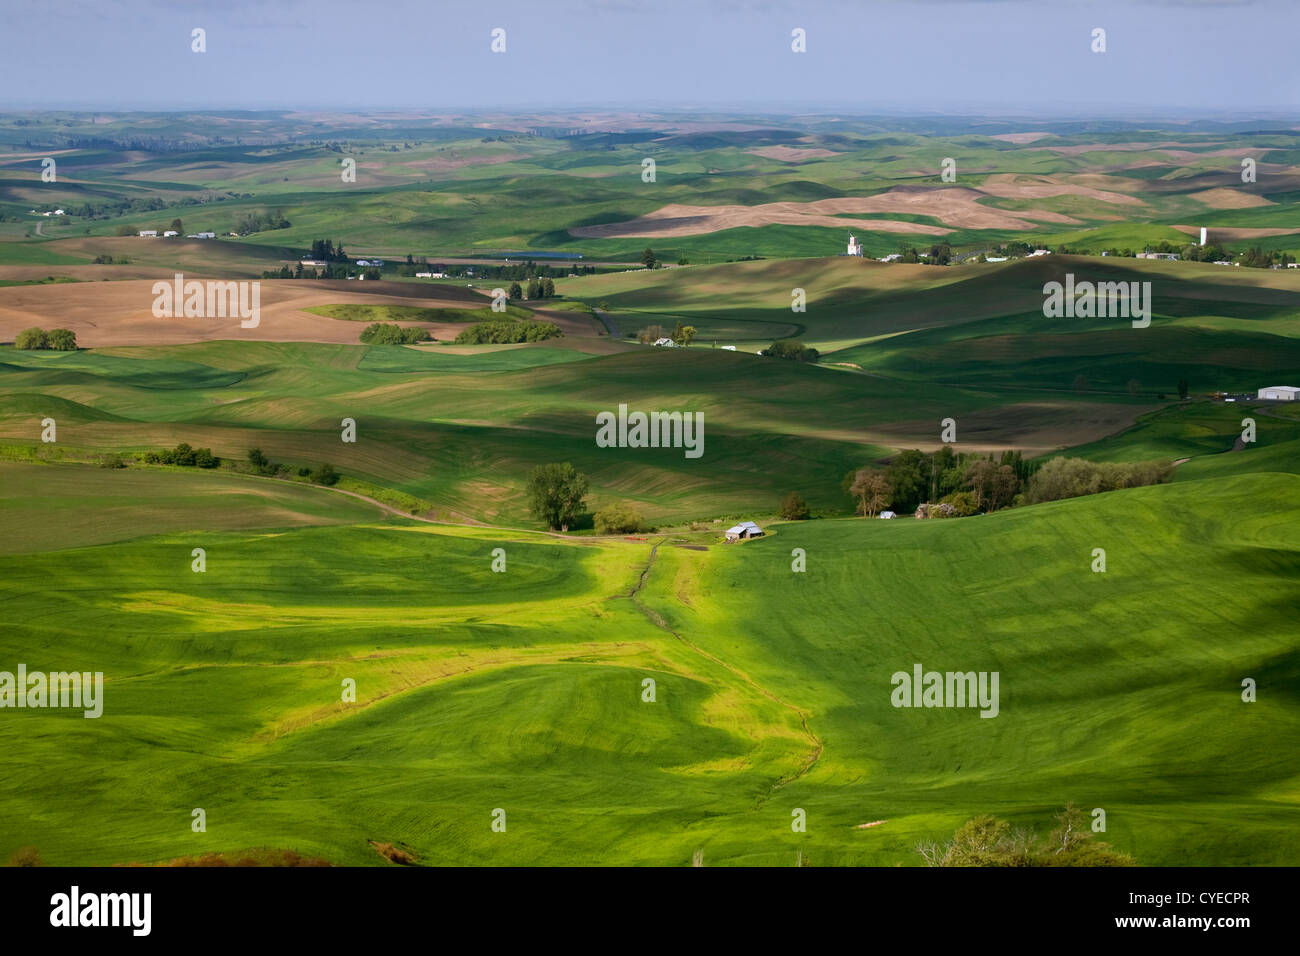 WA05490-00...WASHINGTON - View over the farm covered rolling hills of the Palouse from Steptoe Butte State Park. Stock Photo